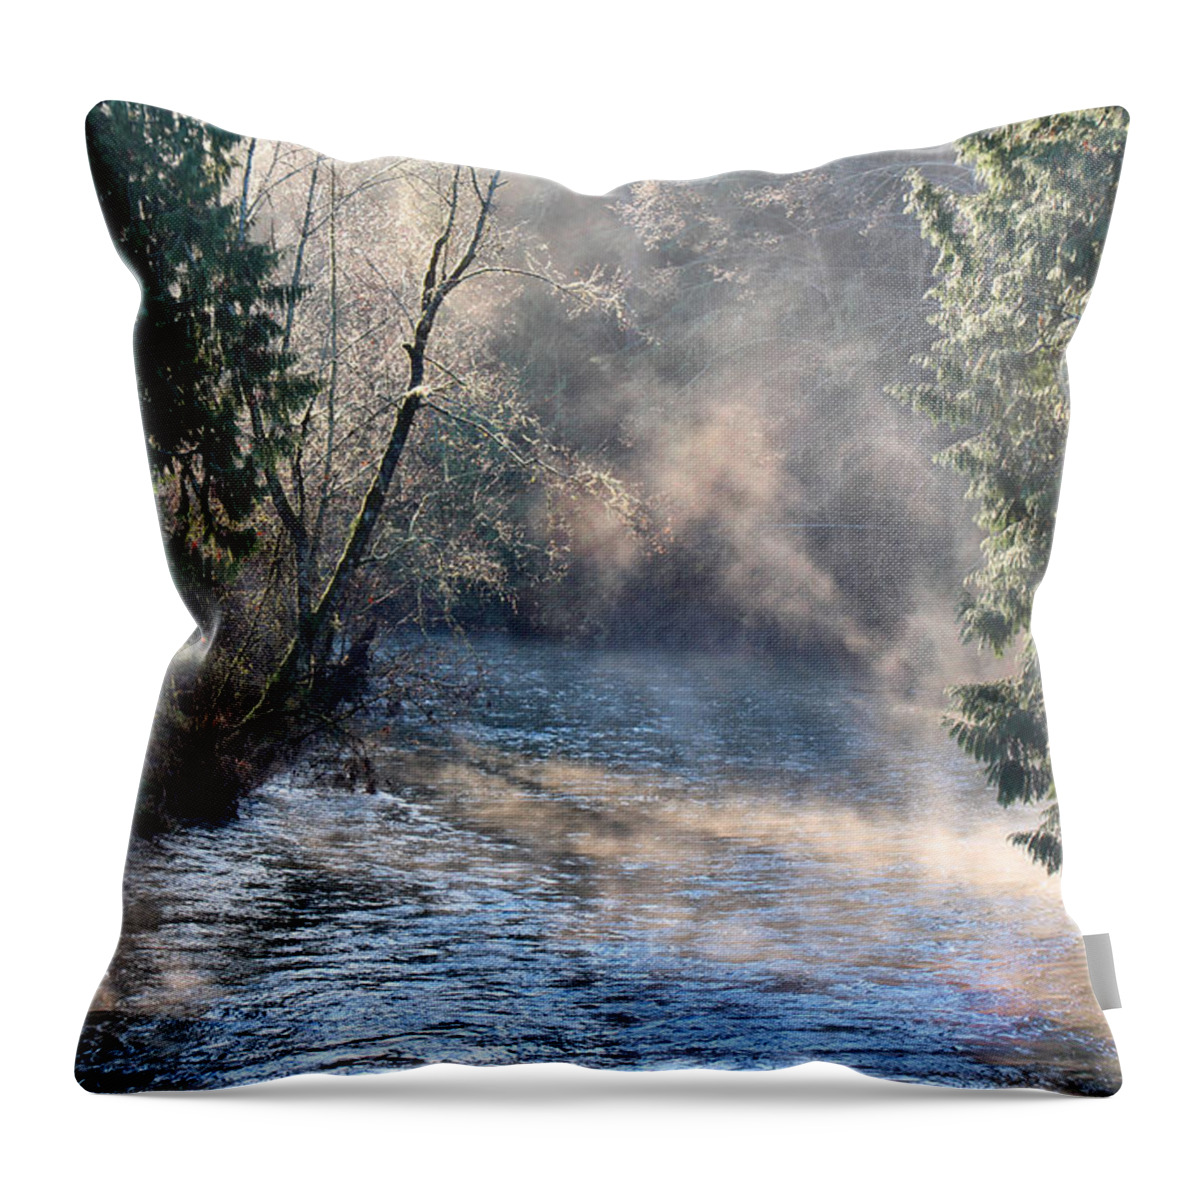 Landscape Throw Pillow featuring the photograph Nearer To Thee by Rory Siegel